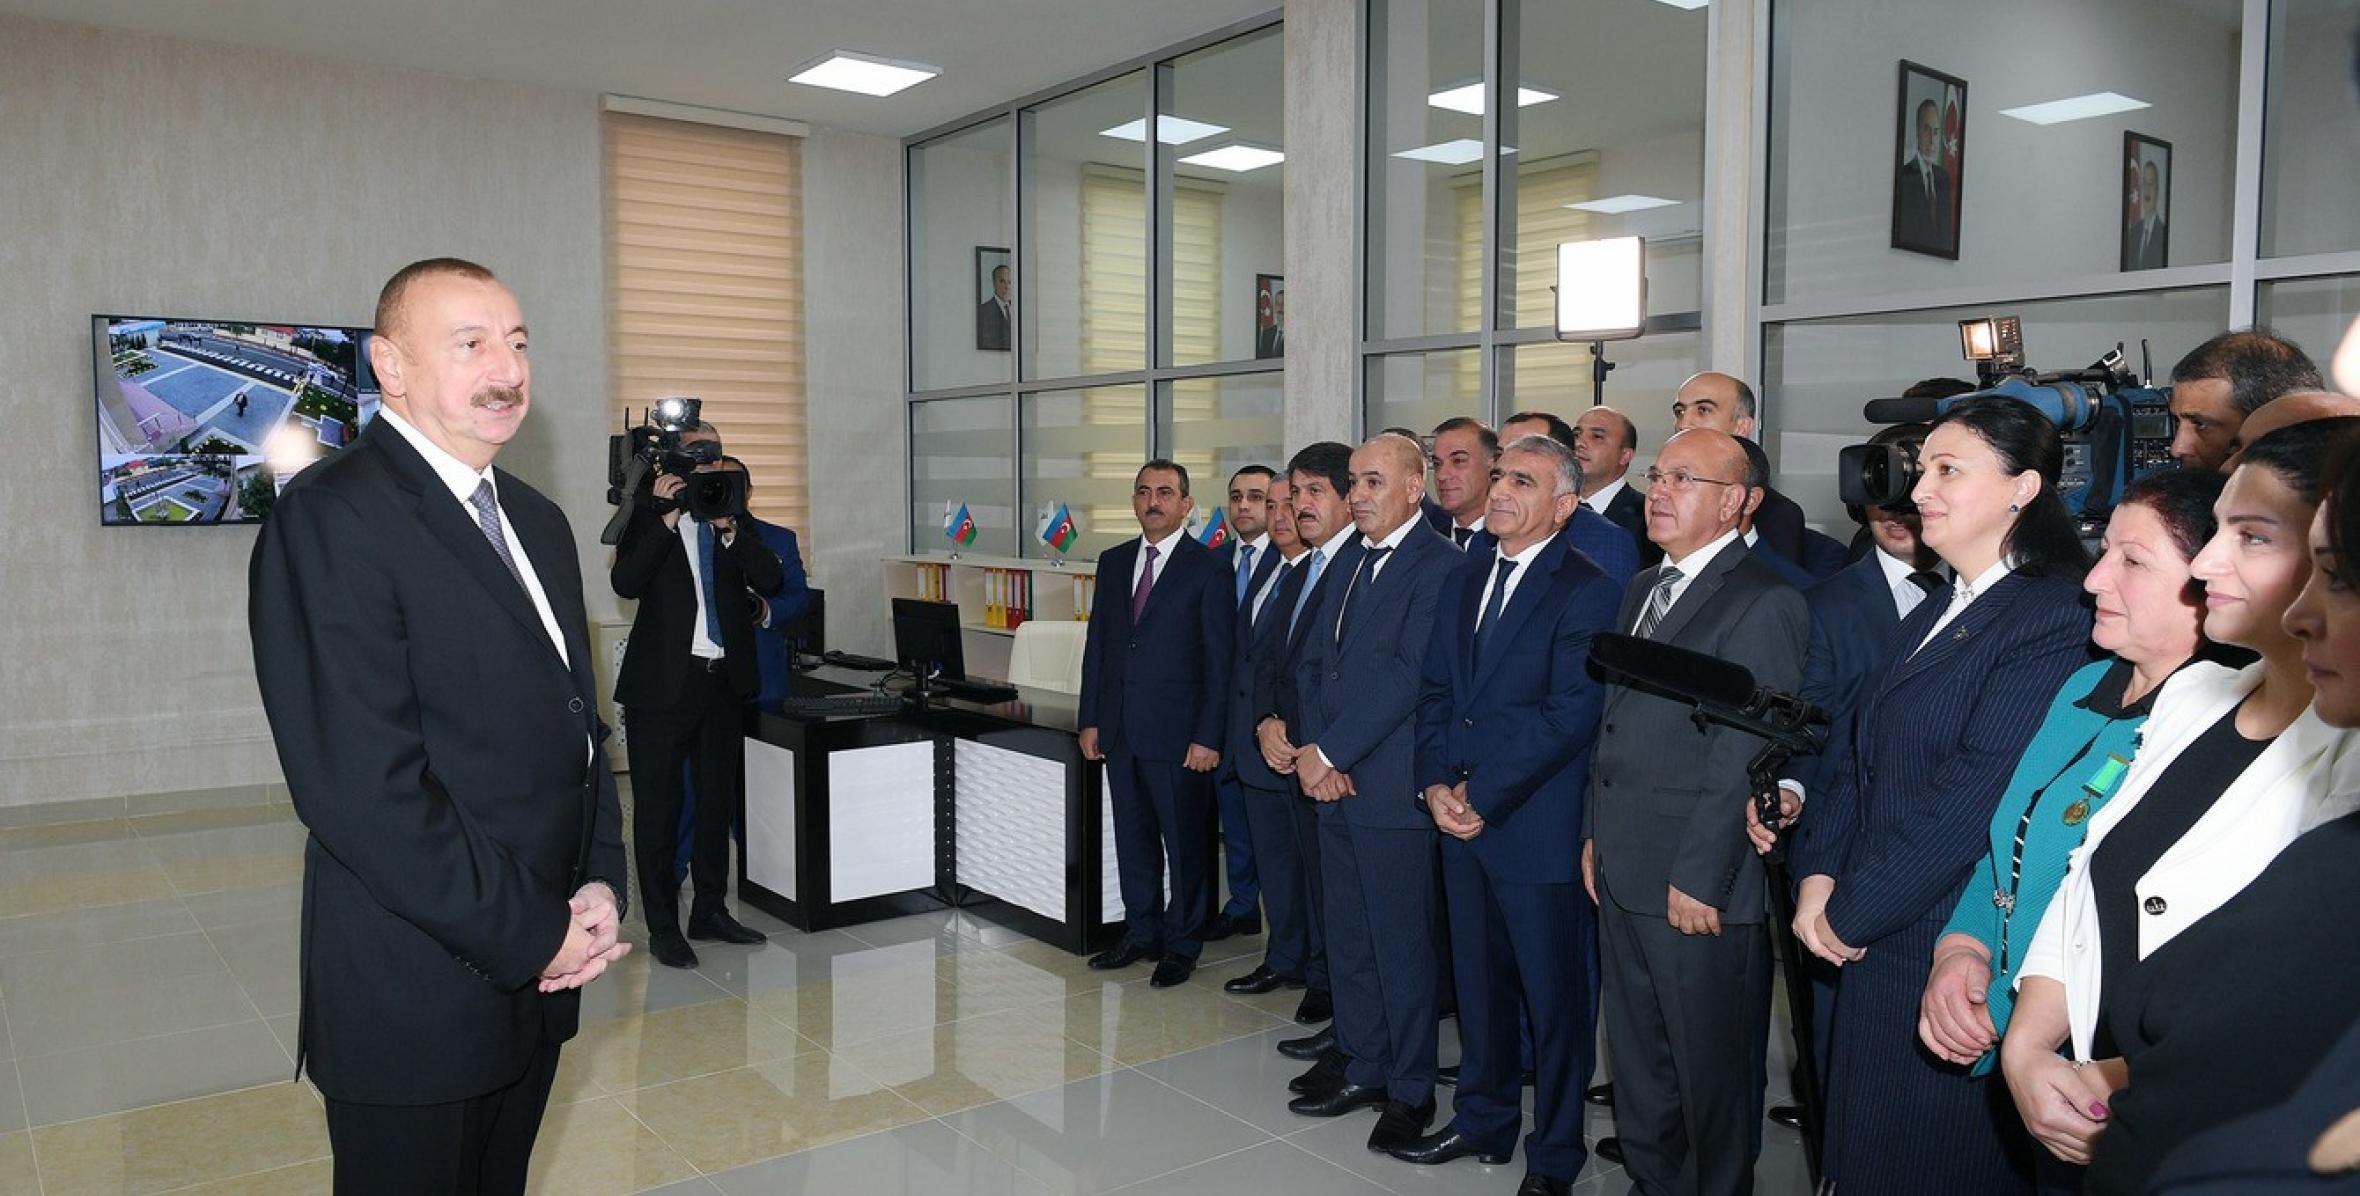 Speech by Ilham Aliyev at the meeting with representatives of the general public in Astara